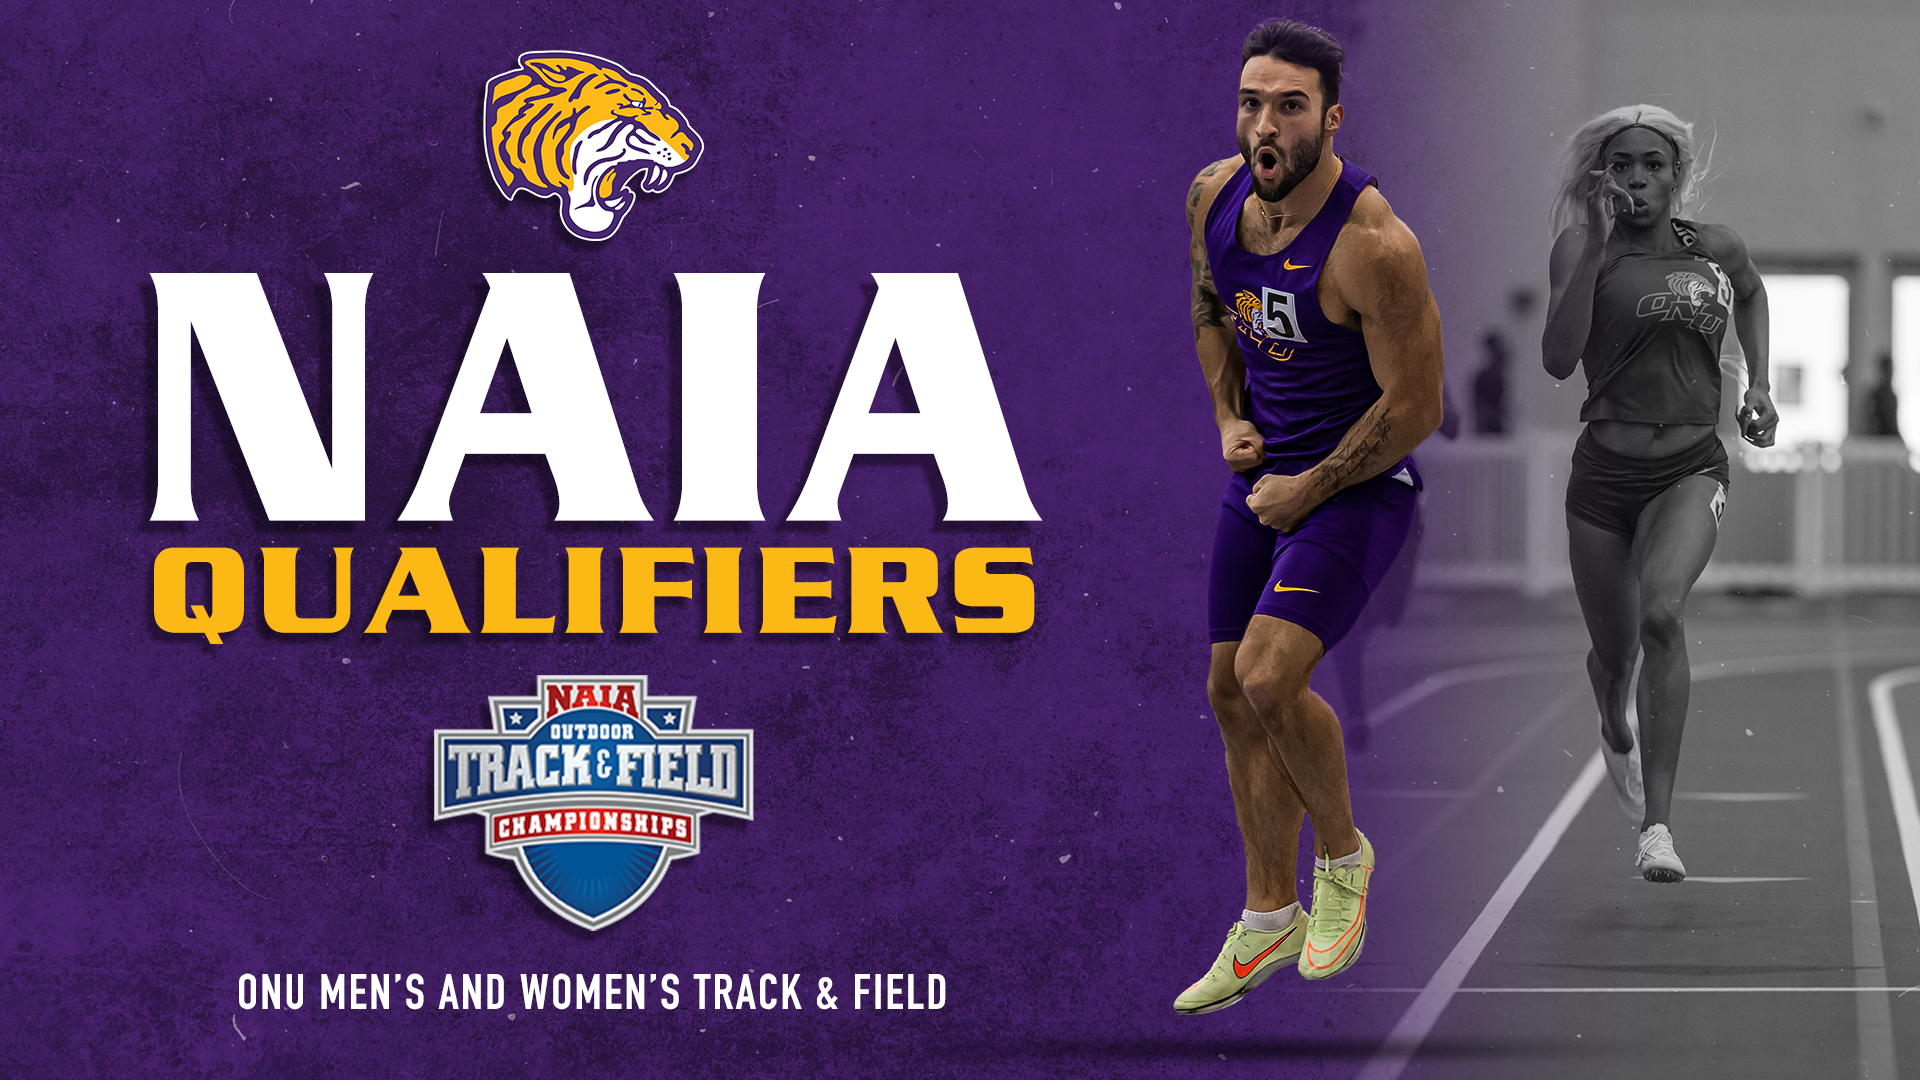 ONU QUALIFIERS ANNOUNCED FOR 2023 NAIA INDOOR TRACK & FIELD NATIONAL CHAMPIONSHIPS